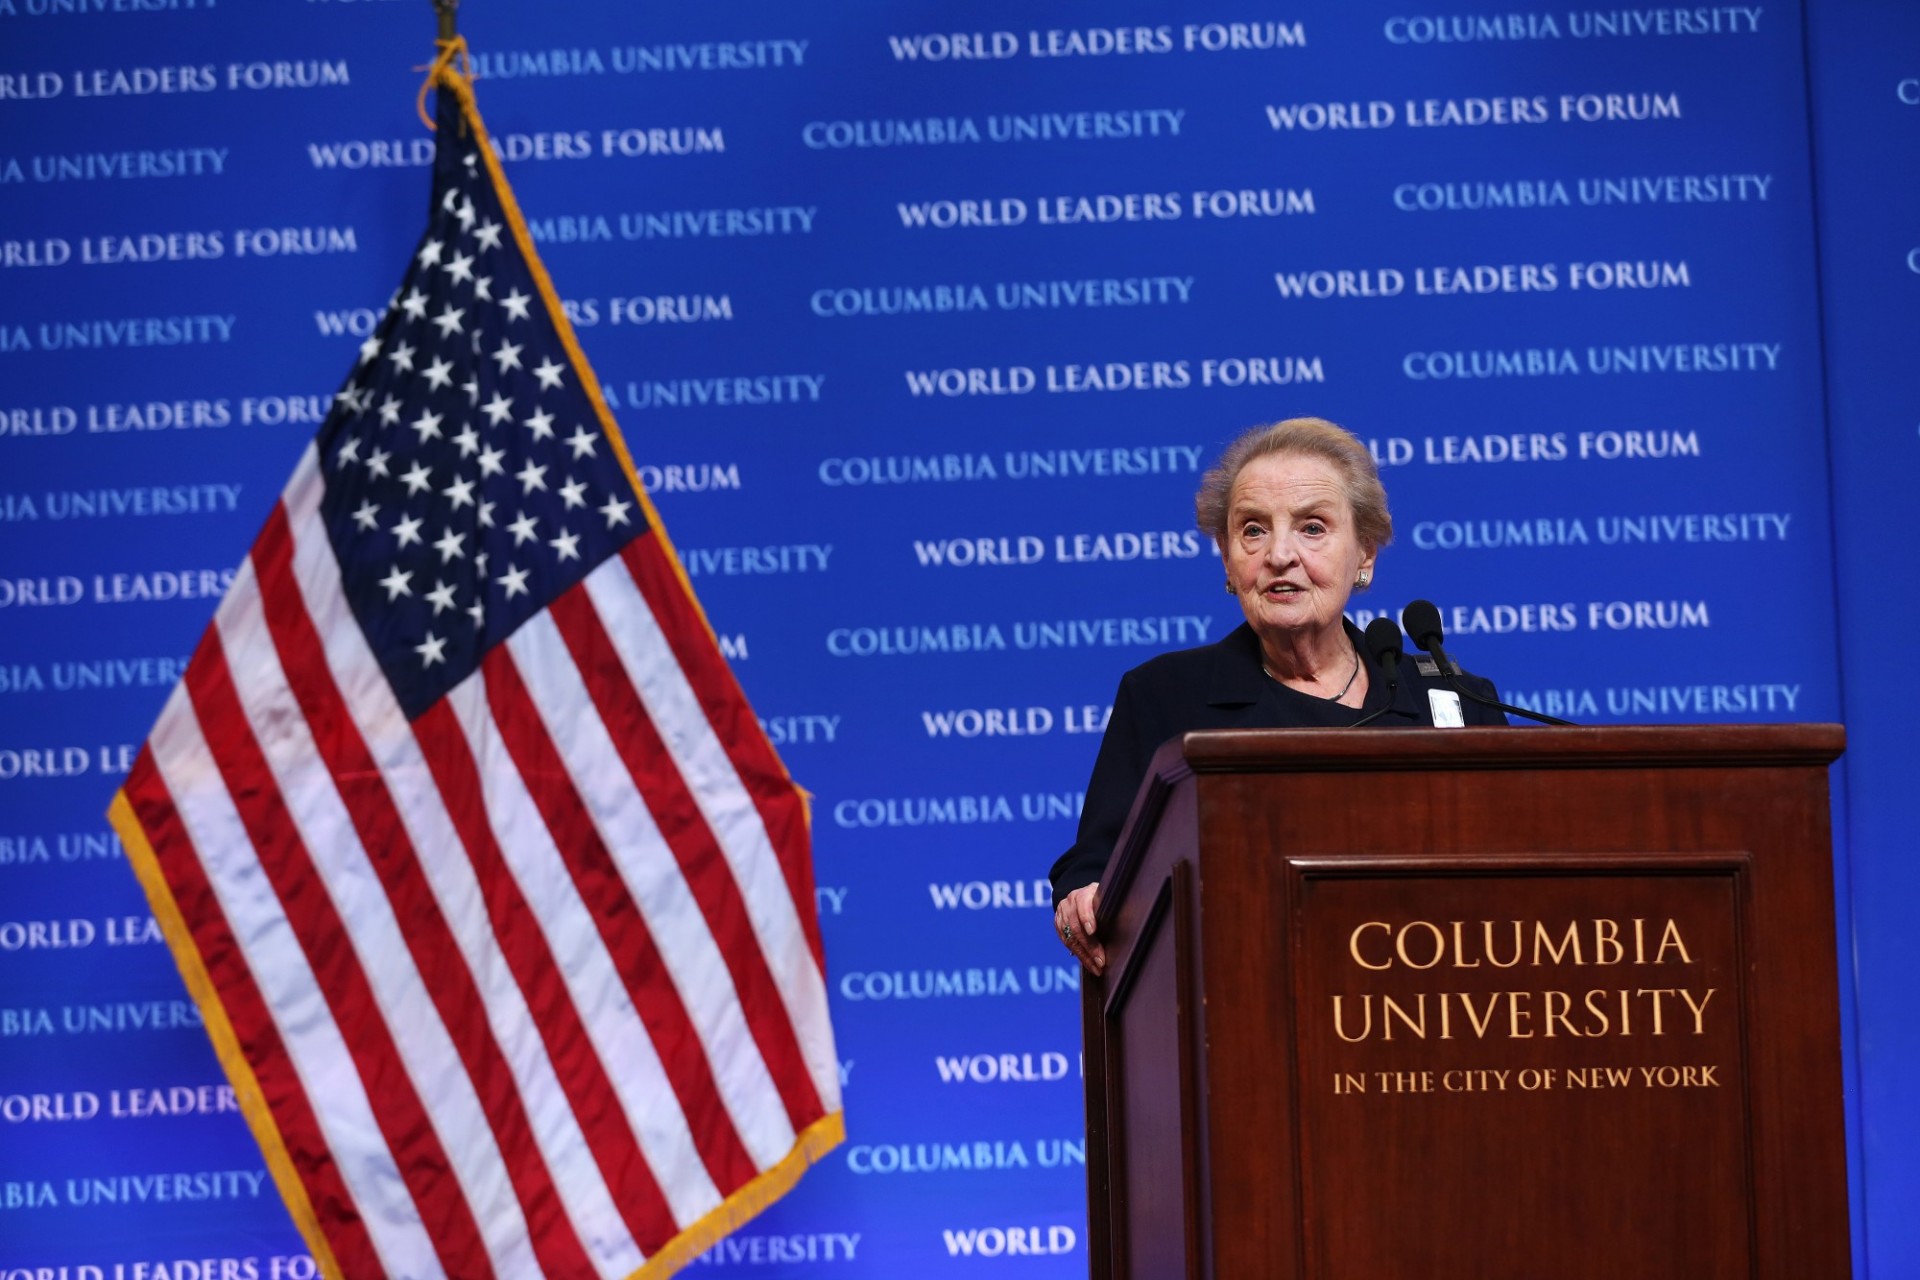 The Honorable Madeleine K. Albright delivers her/his address, “Global Challenges of Today - Commemorating Václav Havel,” to Columbia University students, faculty and staff.